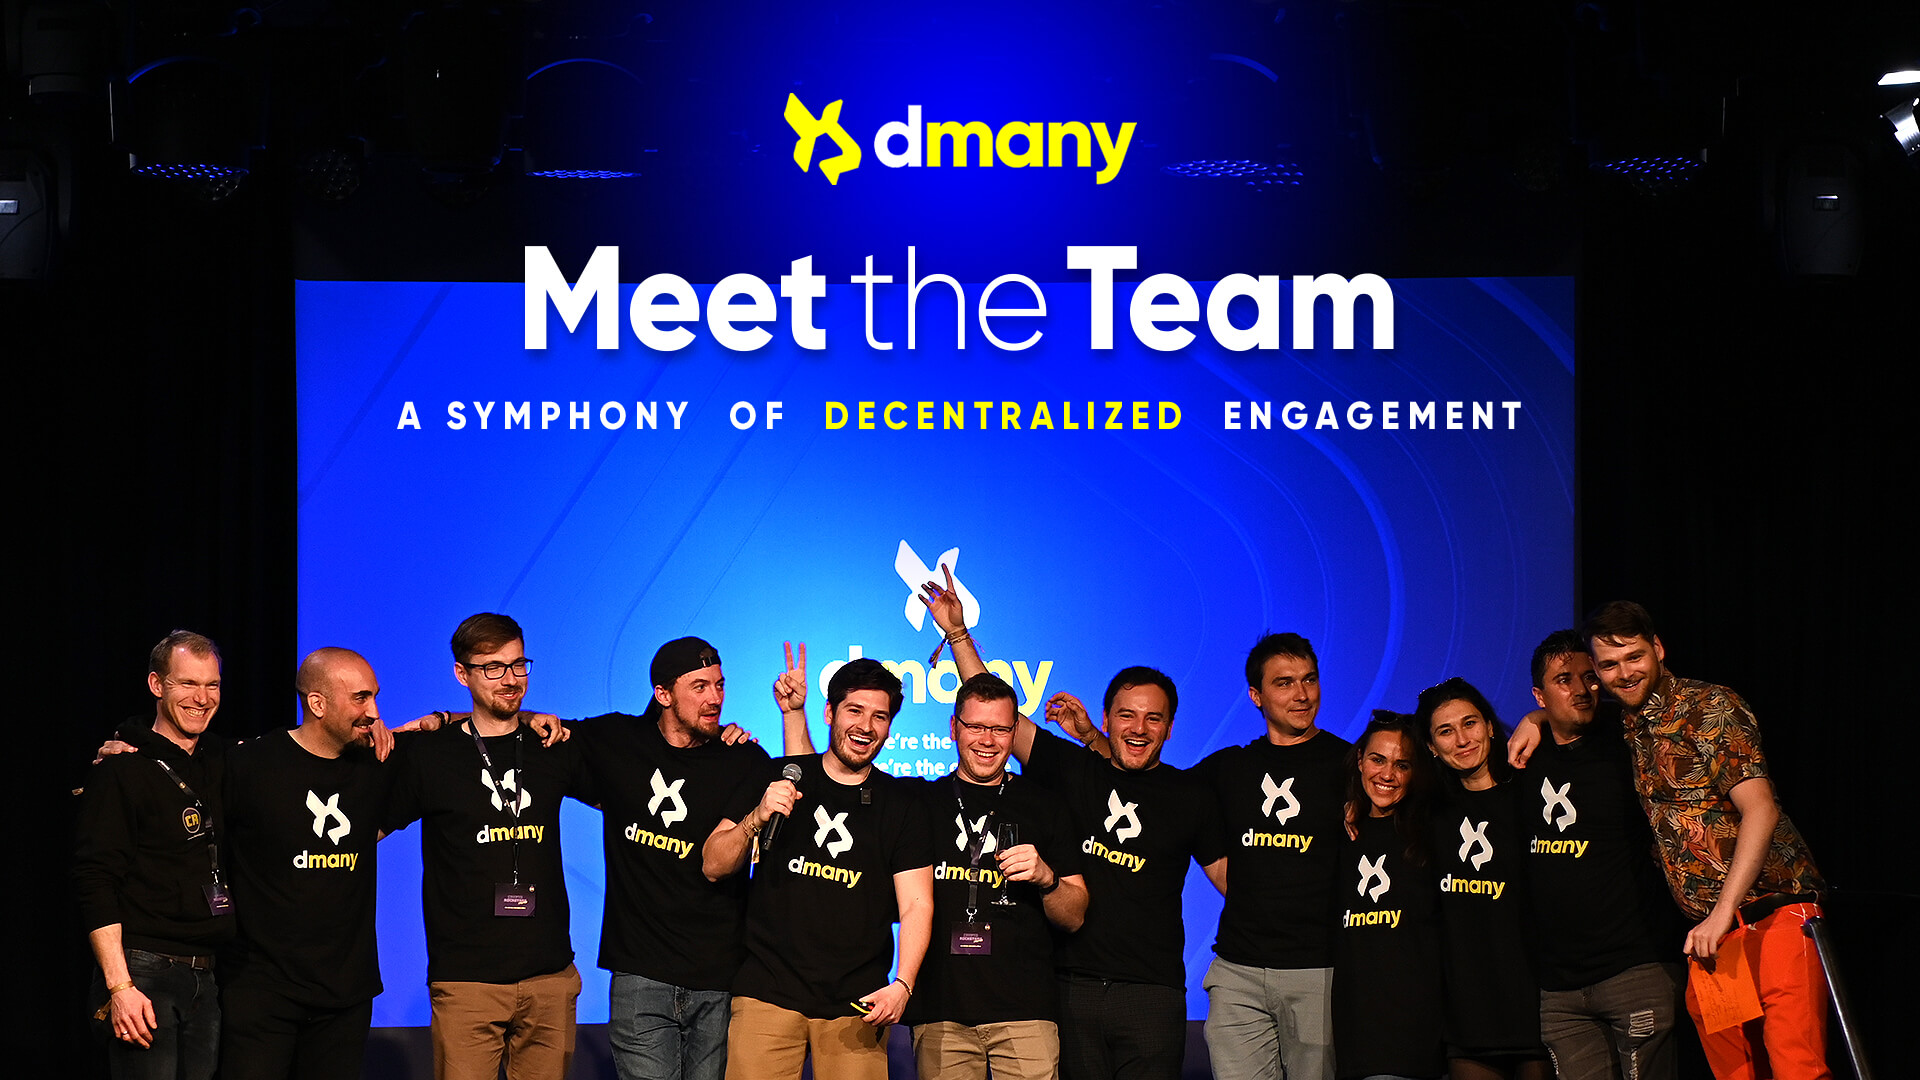 The Dmany Team: A Symphony of Decentralized Engagement